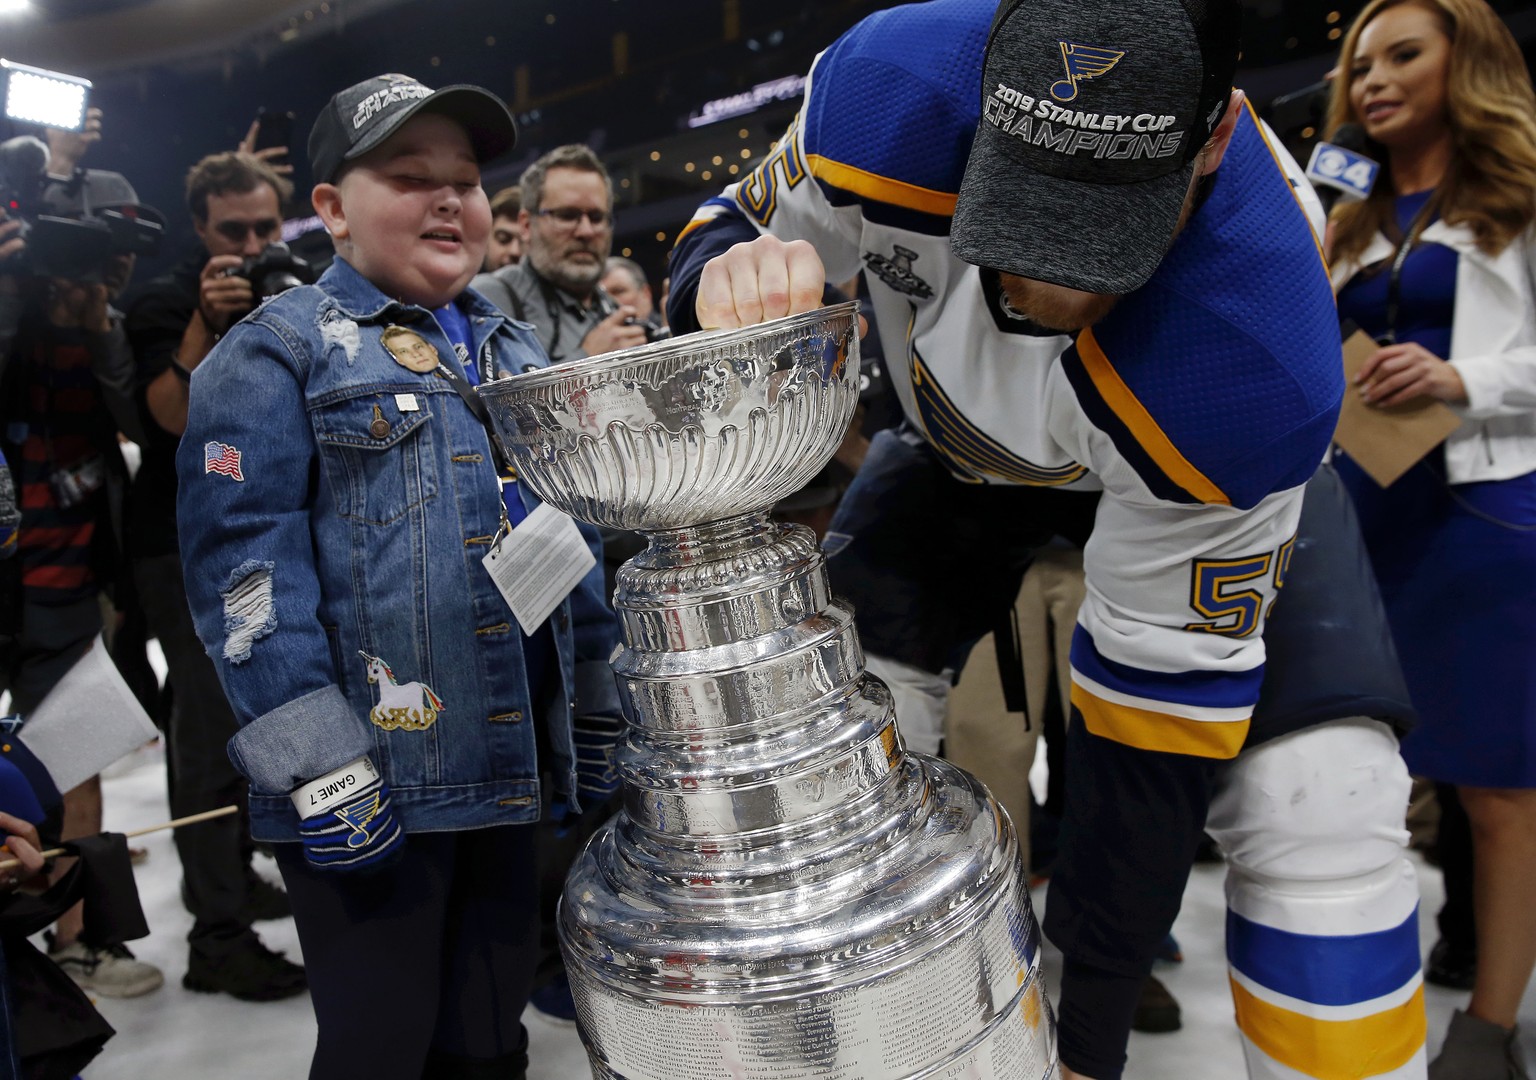 St. Louis Blues fan Laila Anderson, left, watches Colton Parayko lift the Stanley Cup while the team celebrated on the ice after the Blues defeated the Boston Bruins in Game 7 of the NHL Stanley Cup F ...